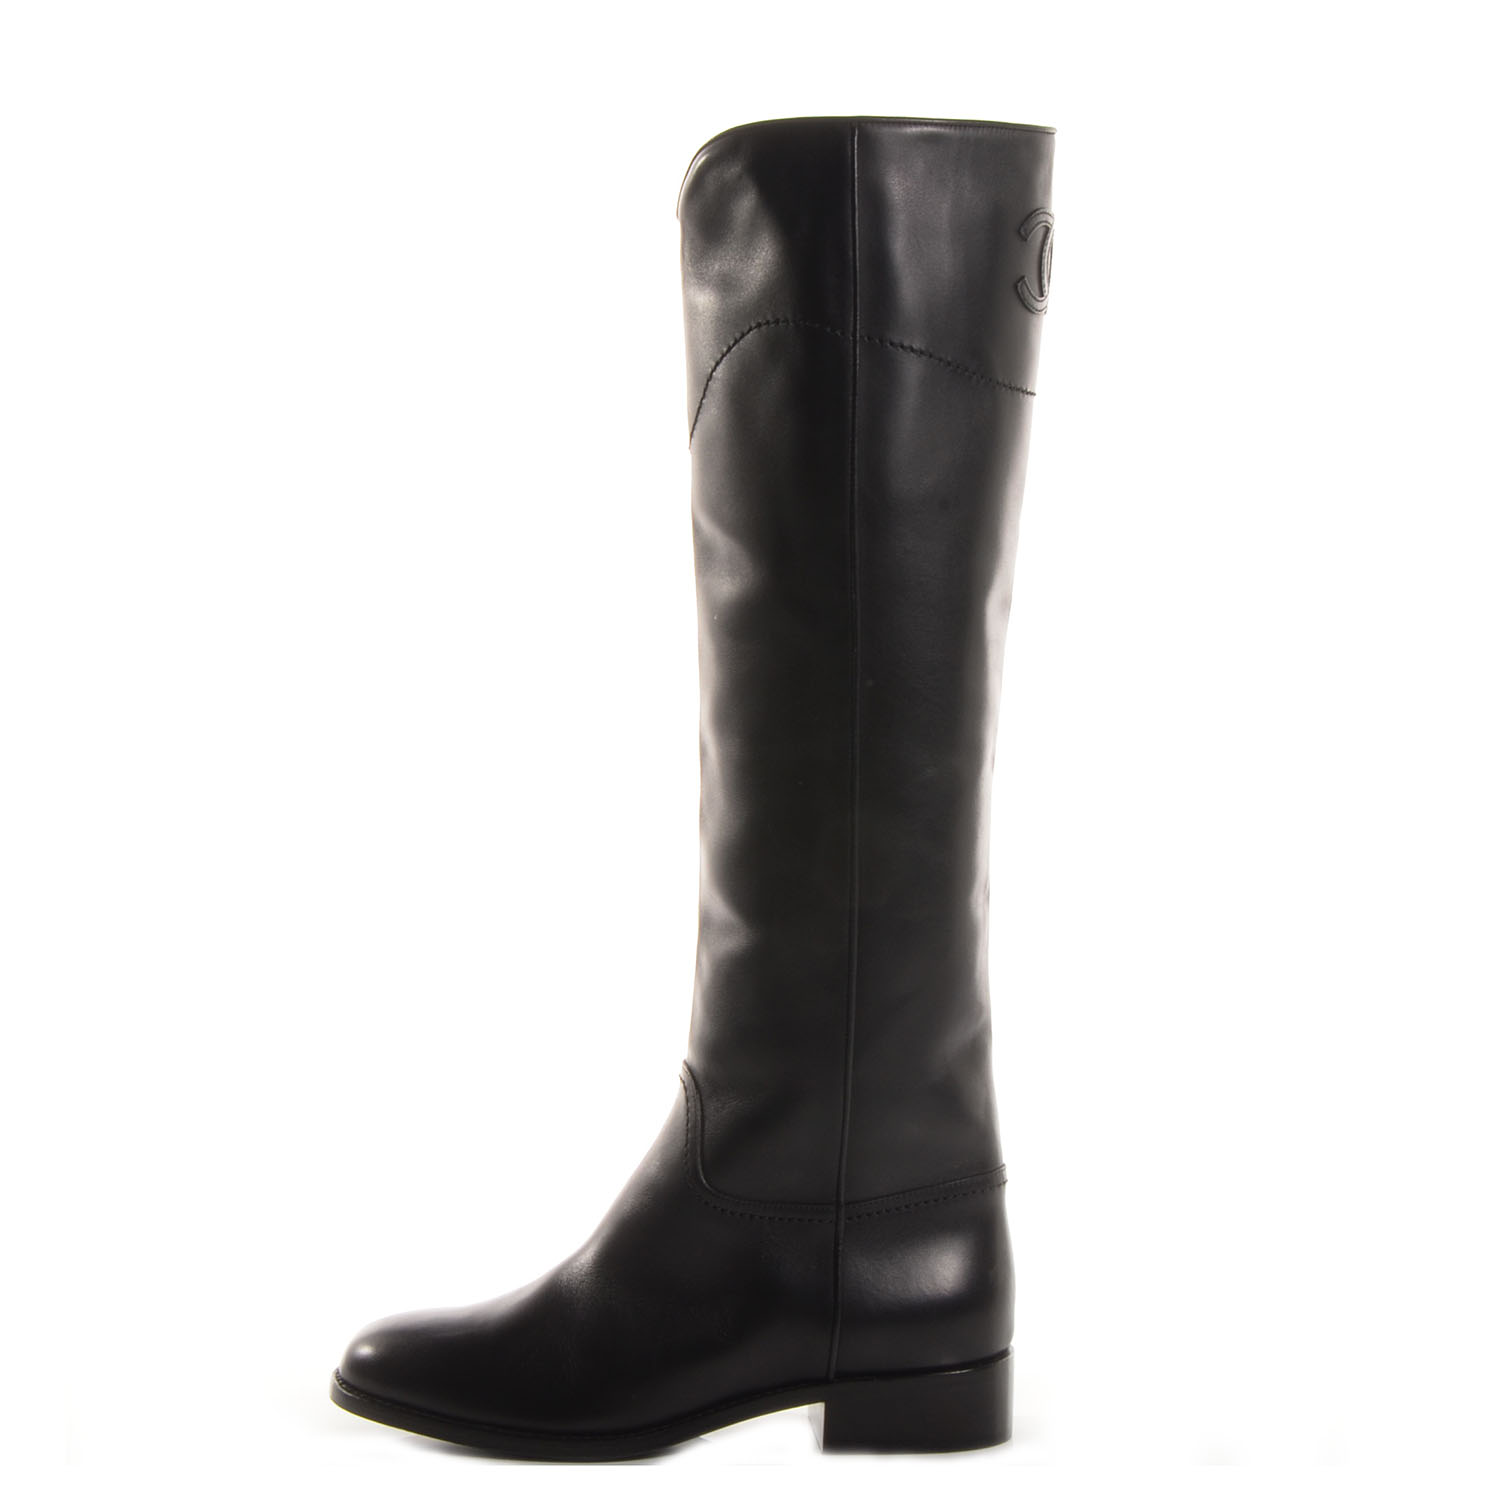 CHANEL Leather Ascot Riding Boots Black 39 68242